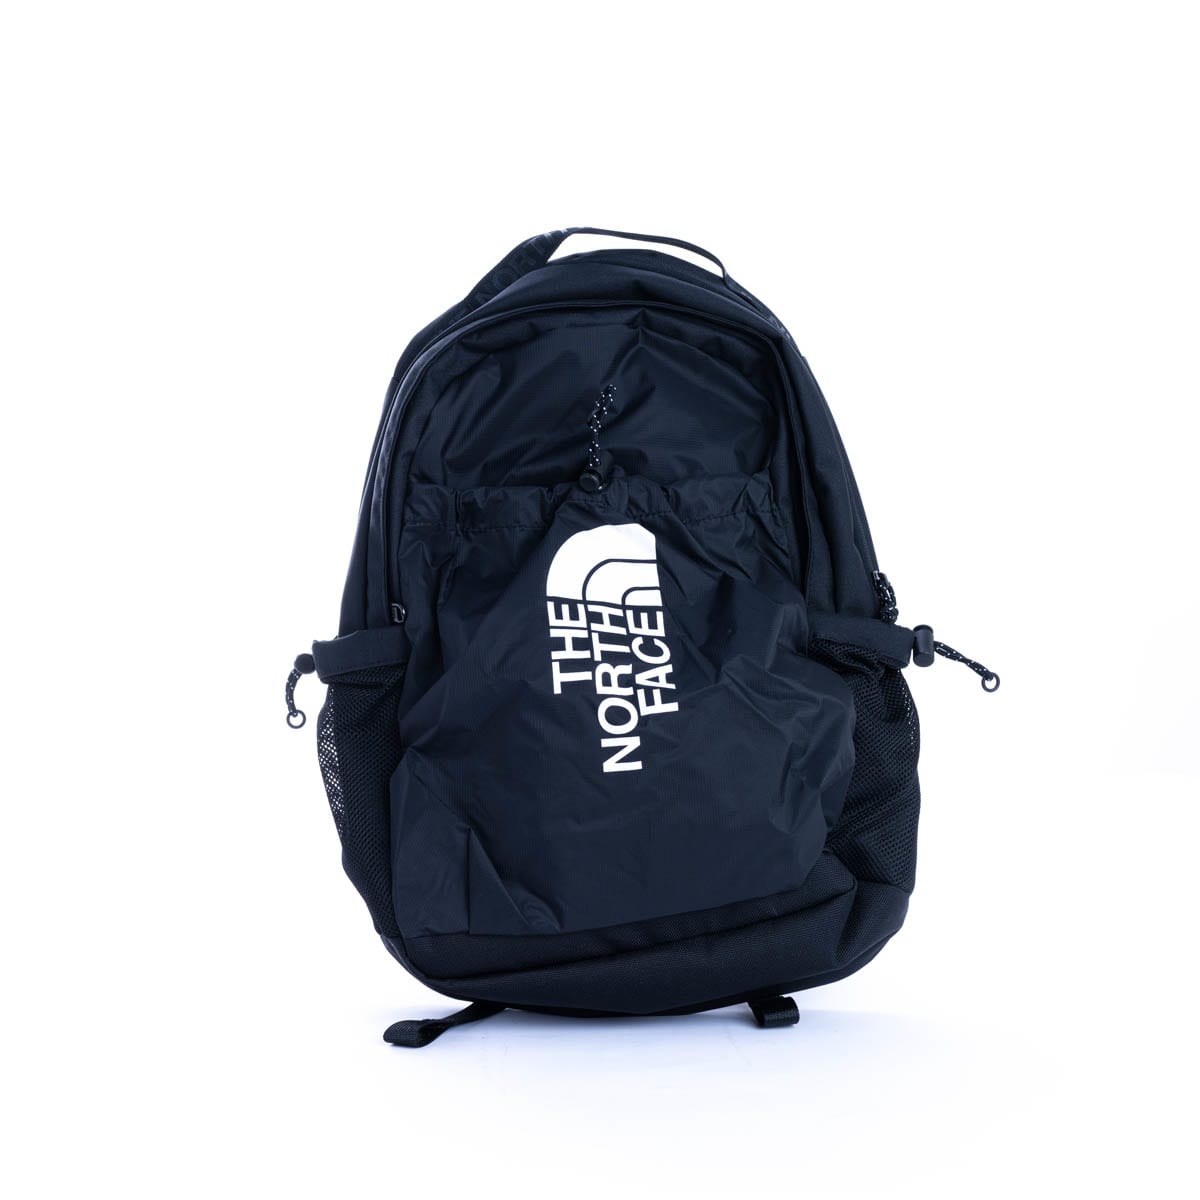 The North Face The North Face bozer Backpack